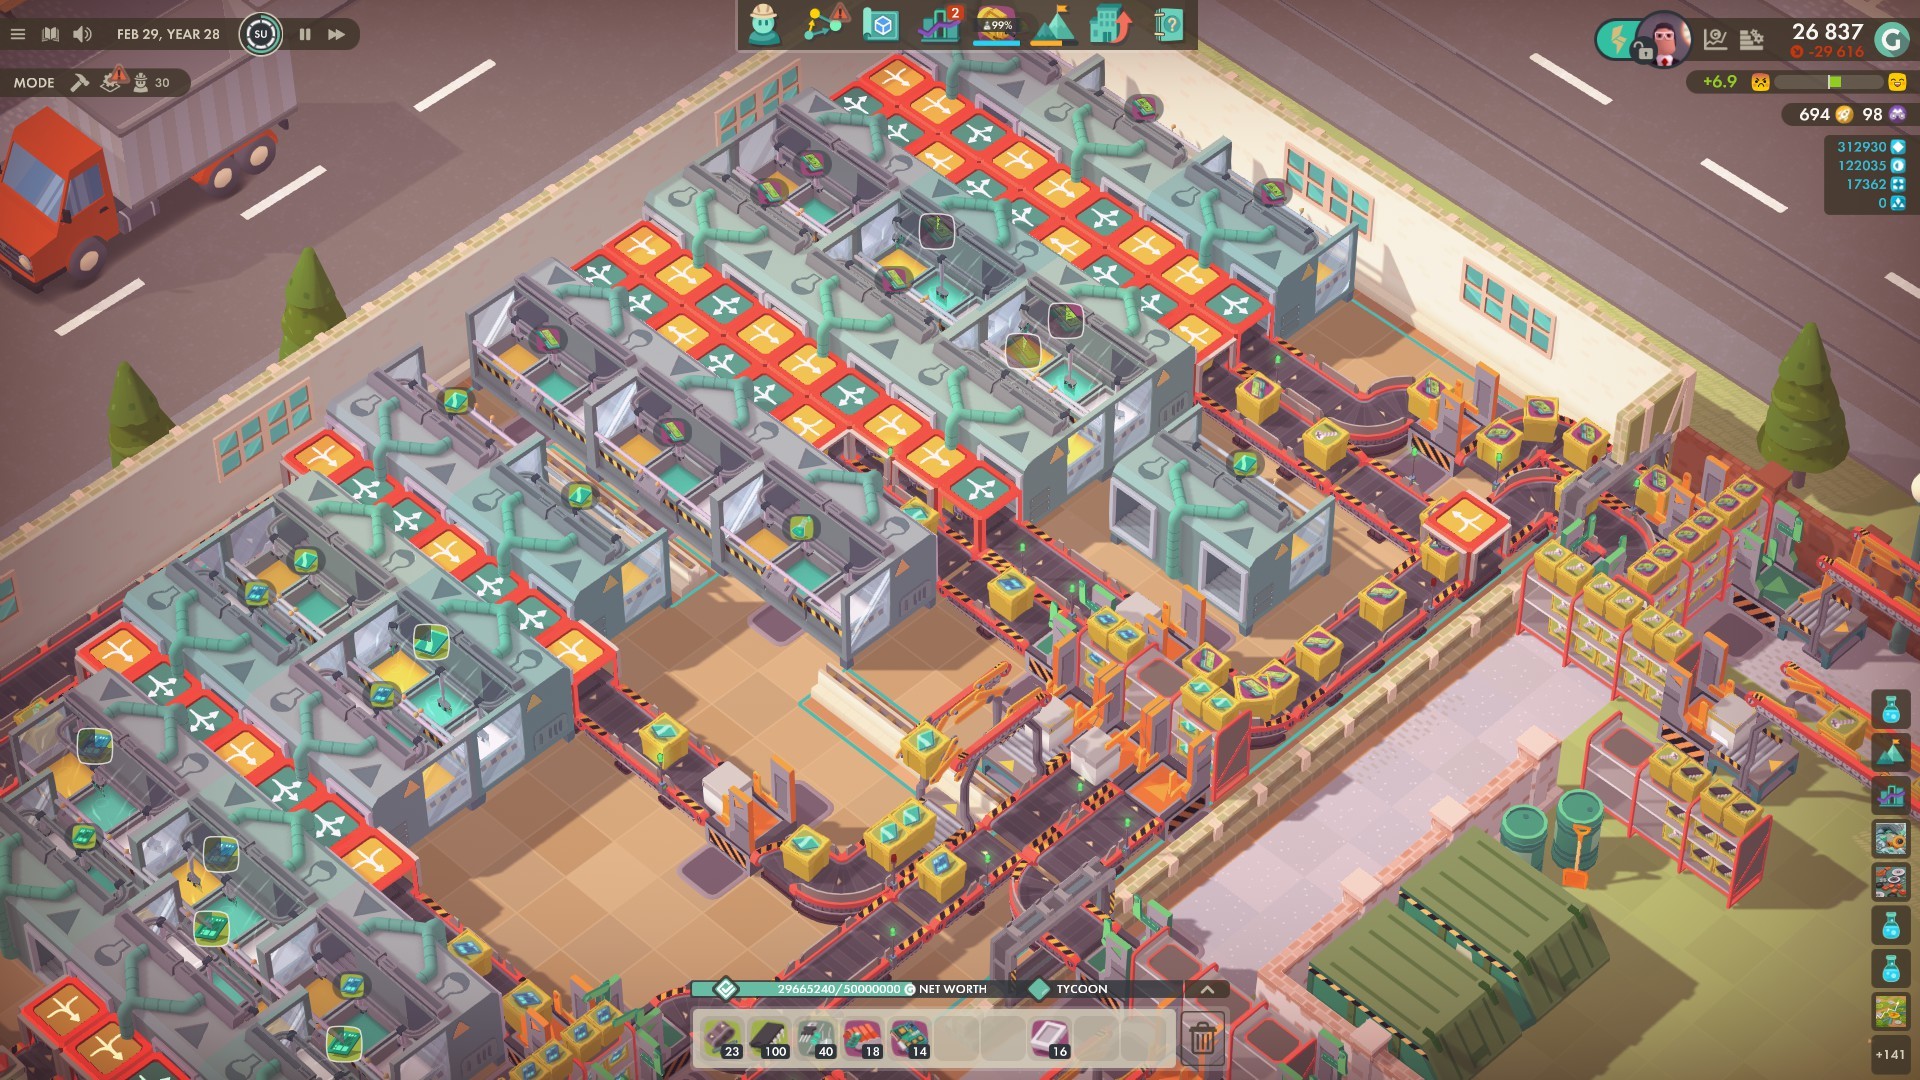 Top business simulation Steam games worth checking out